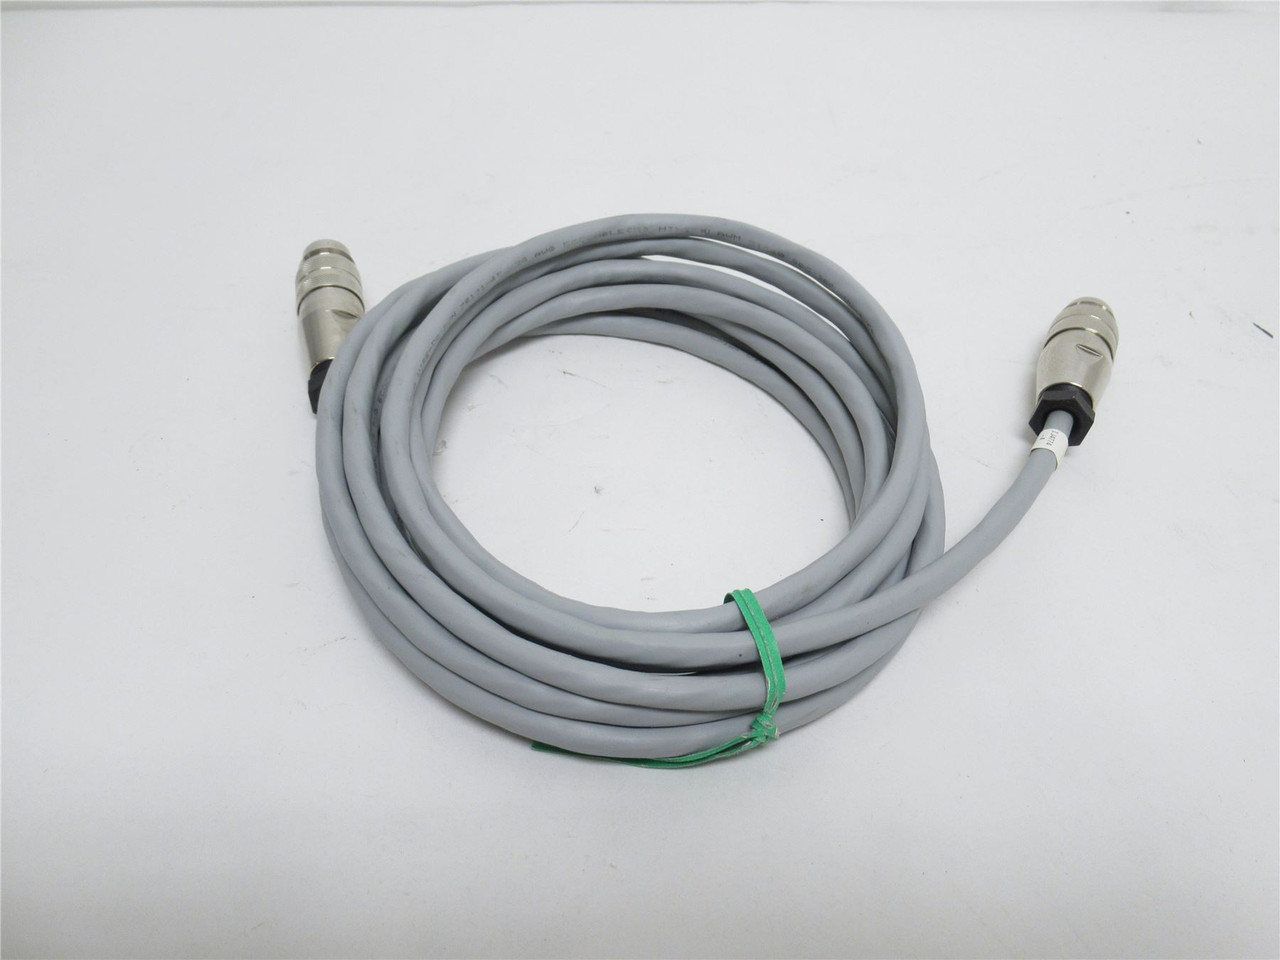 Multivac IJ4774-4; Connector Cable Assembly